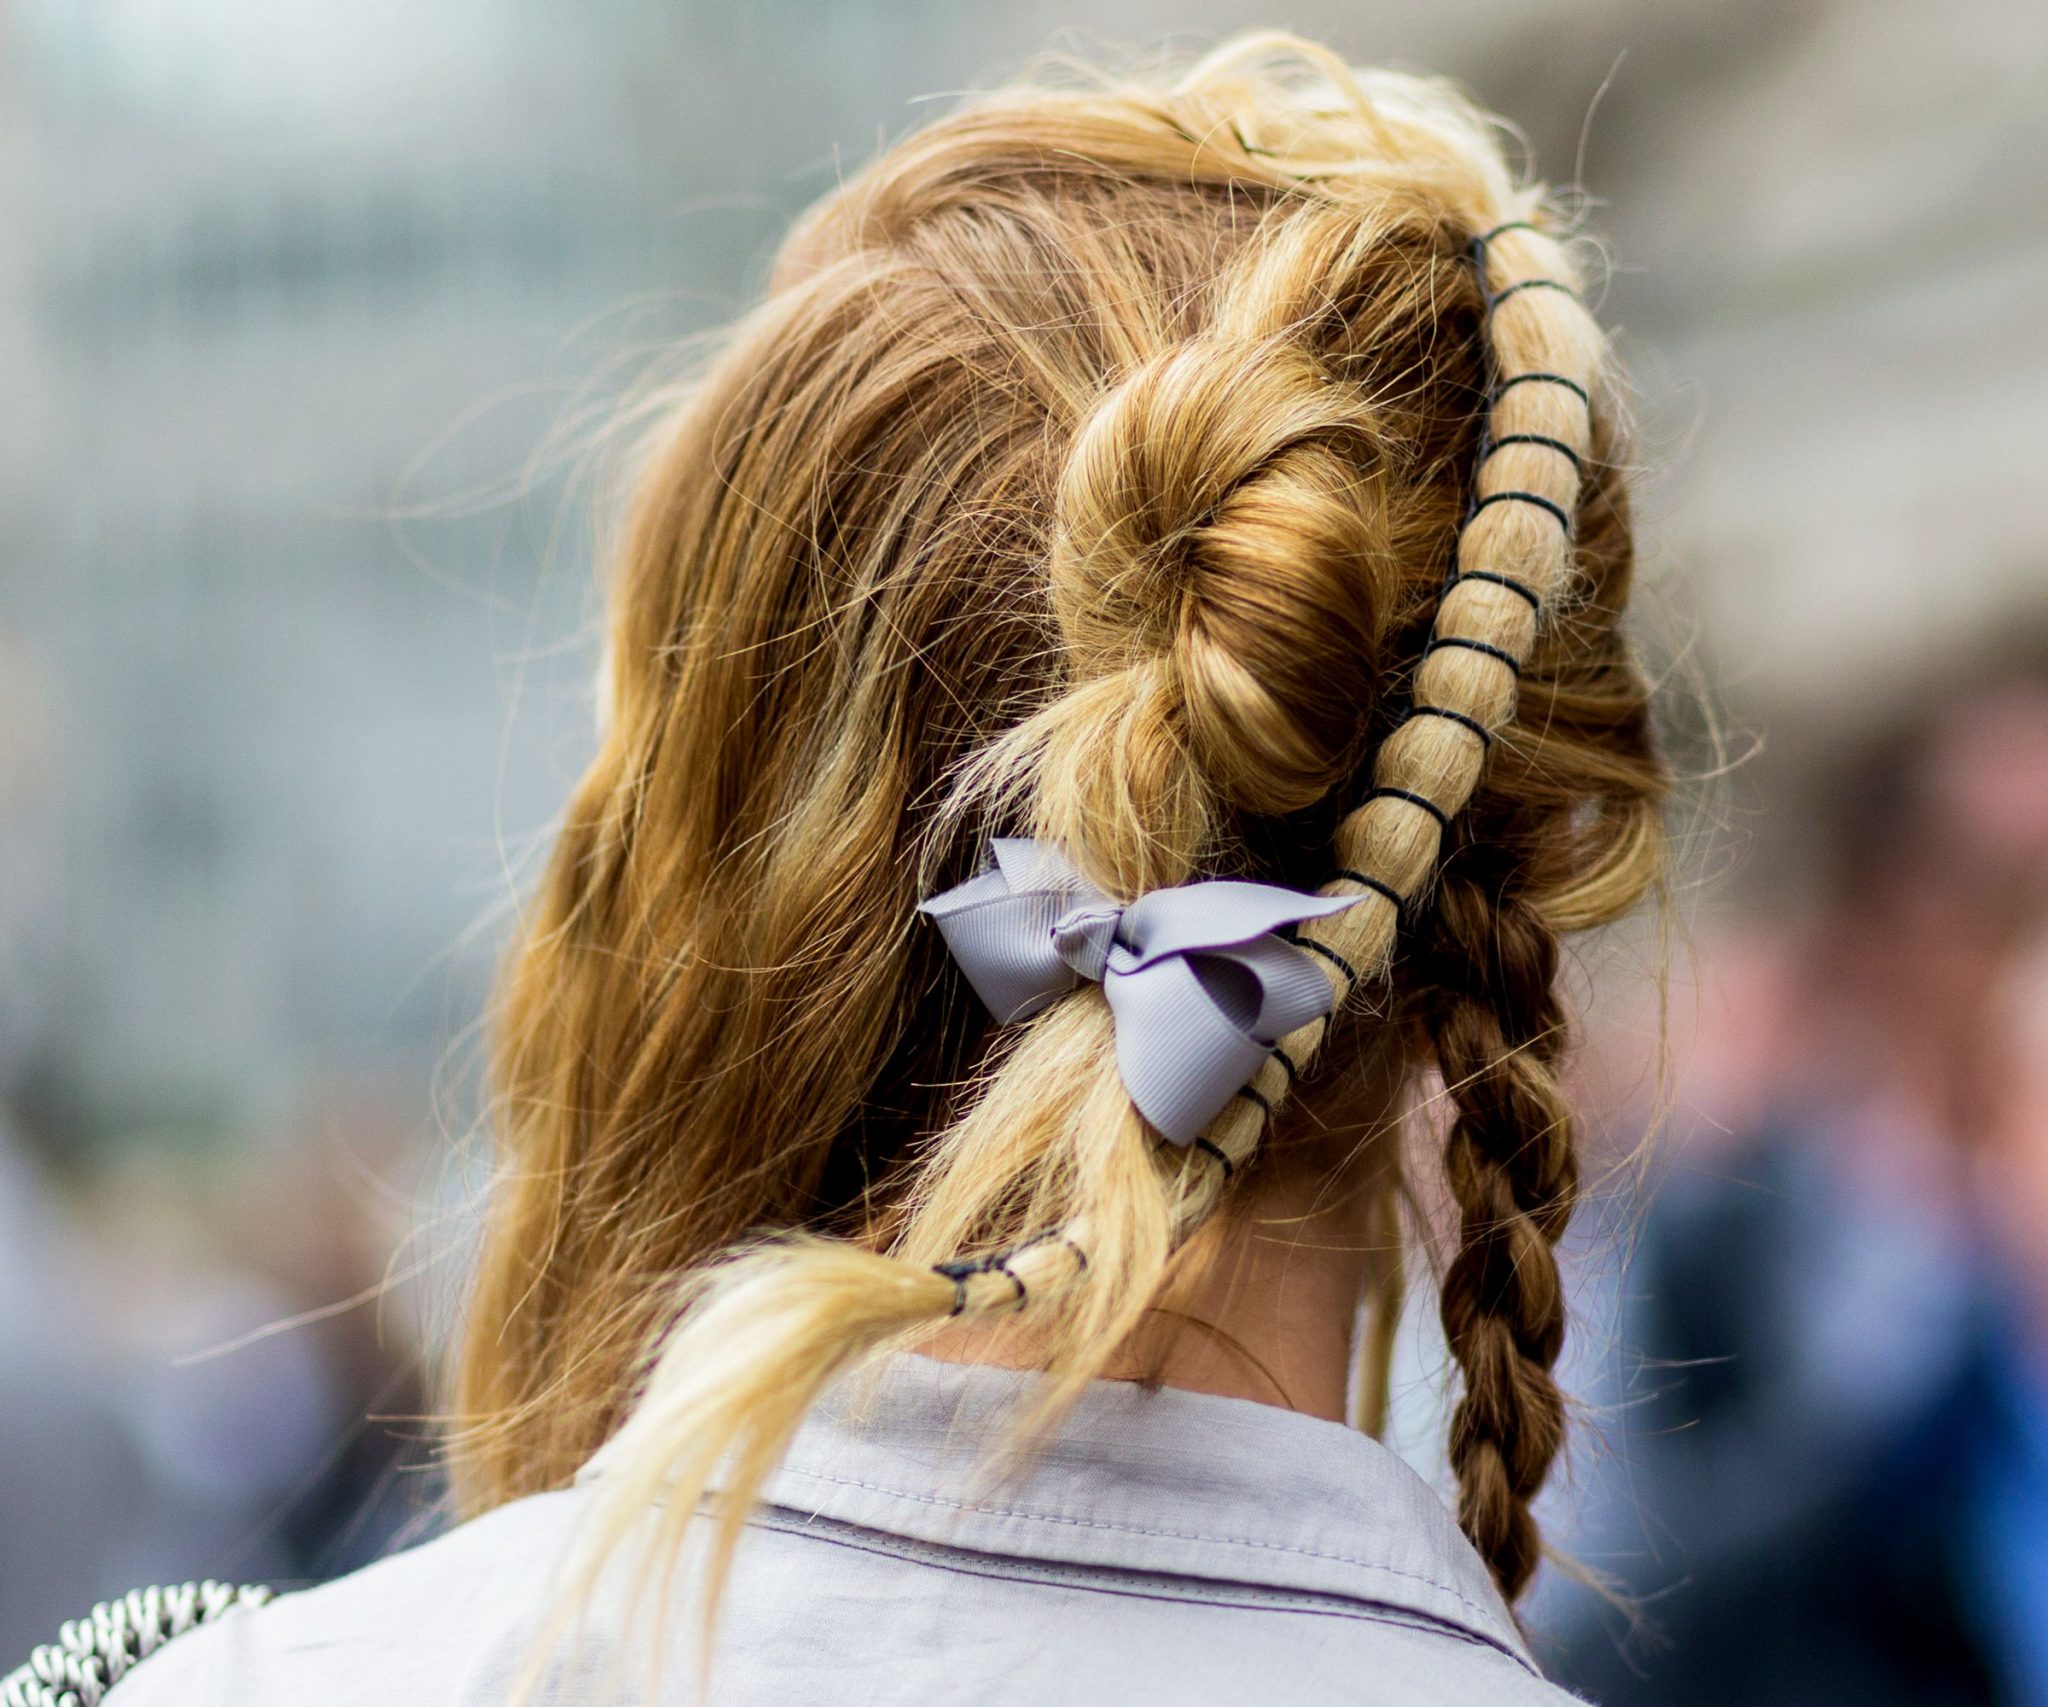 Hair Bows Are Back & Hollywood Can't Get Enough Of The Trend